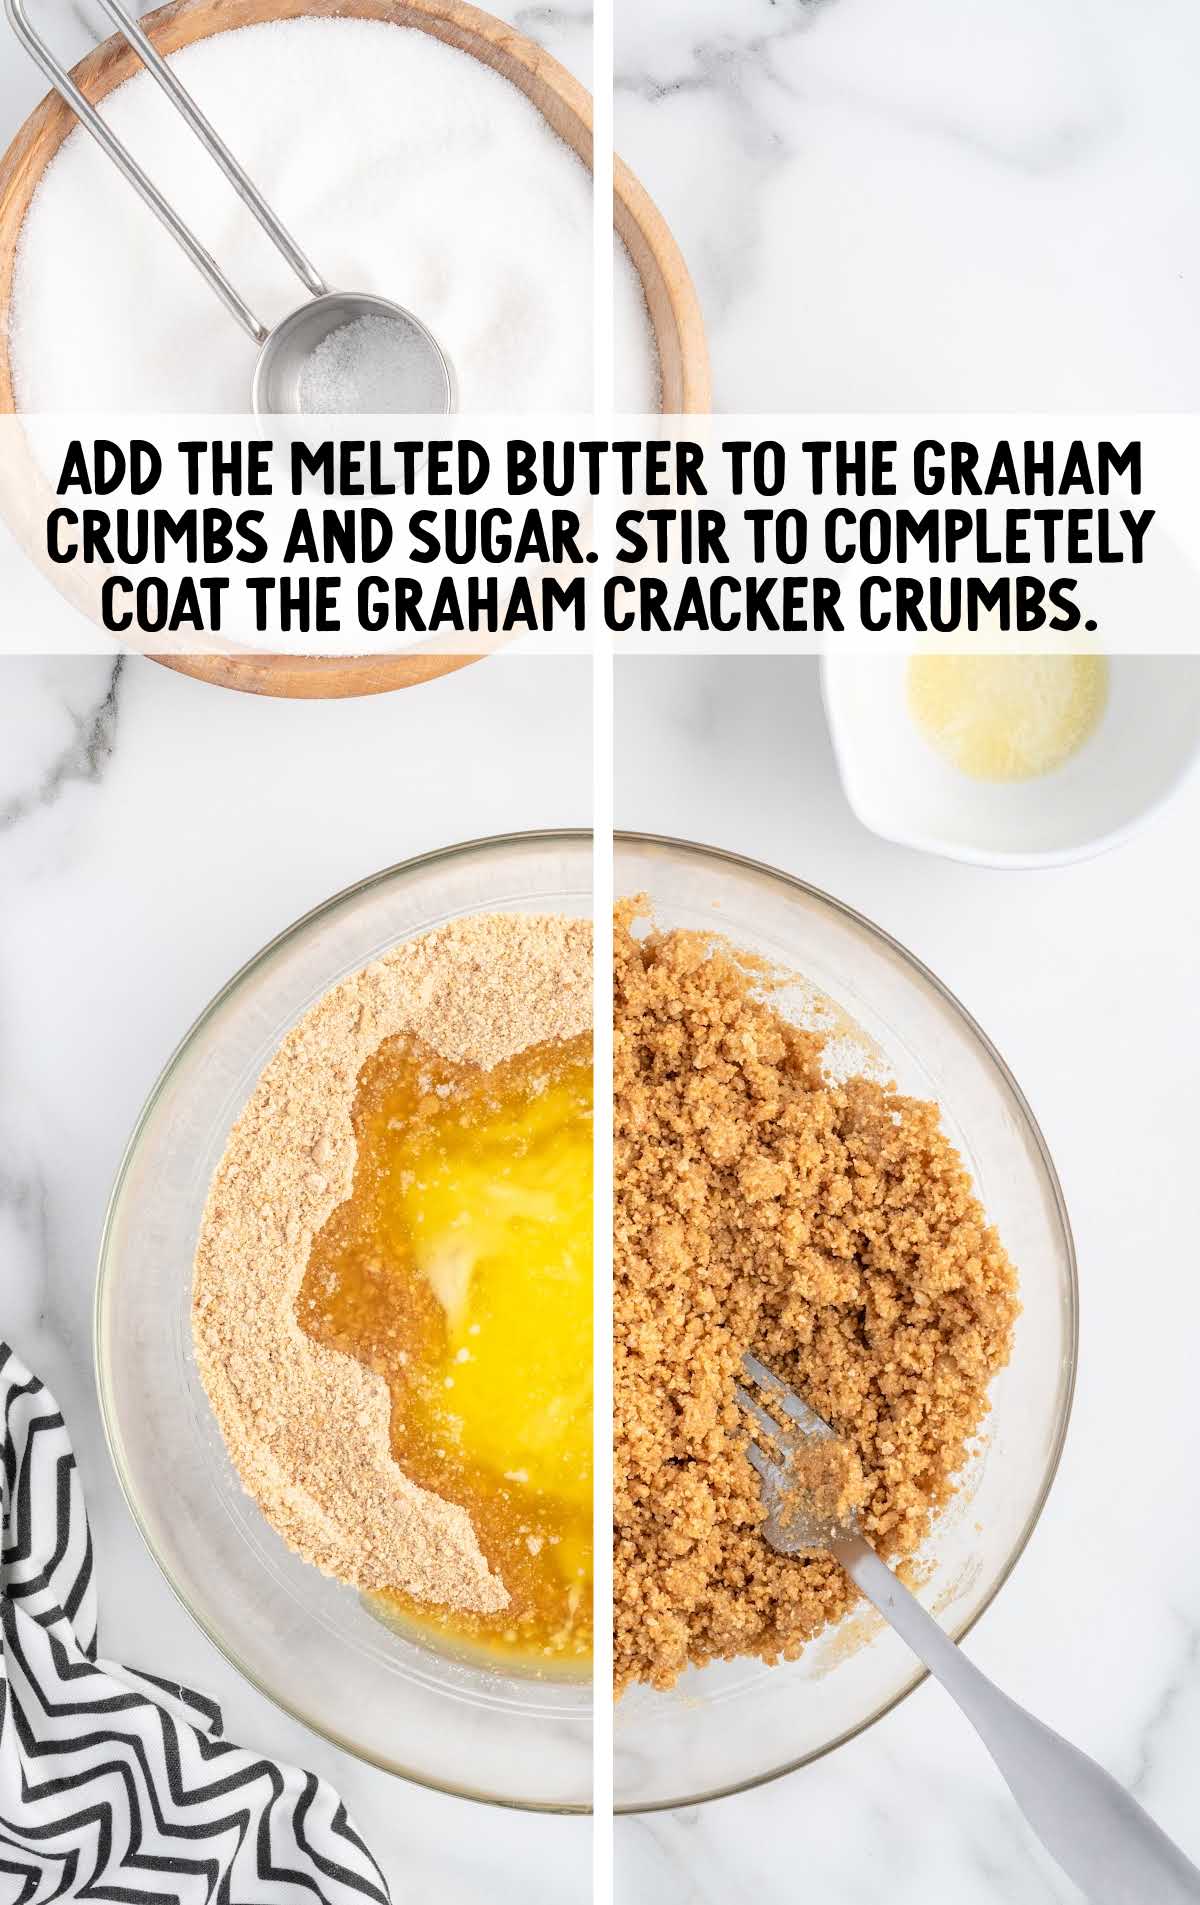 melted butter added to the graham crumbs and sugar